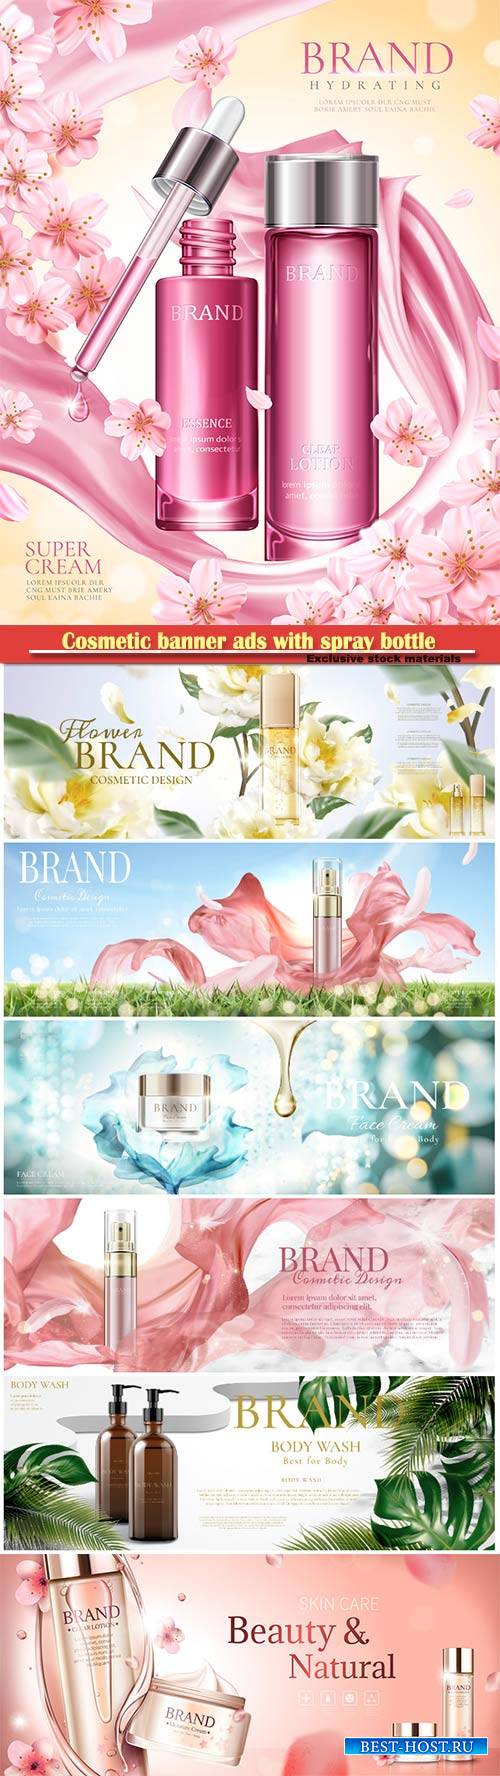 Cosmetic banner ads with spray bottle in 3d illustration vector illustratio ...